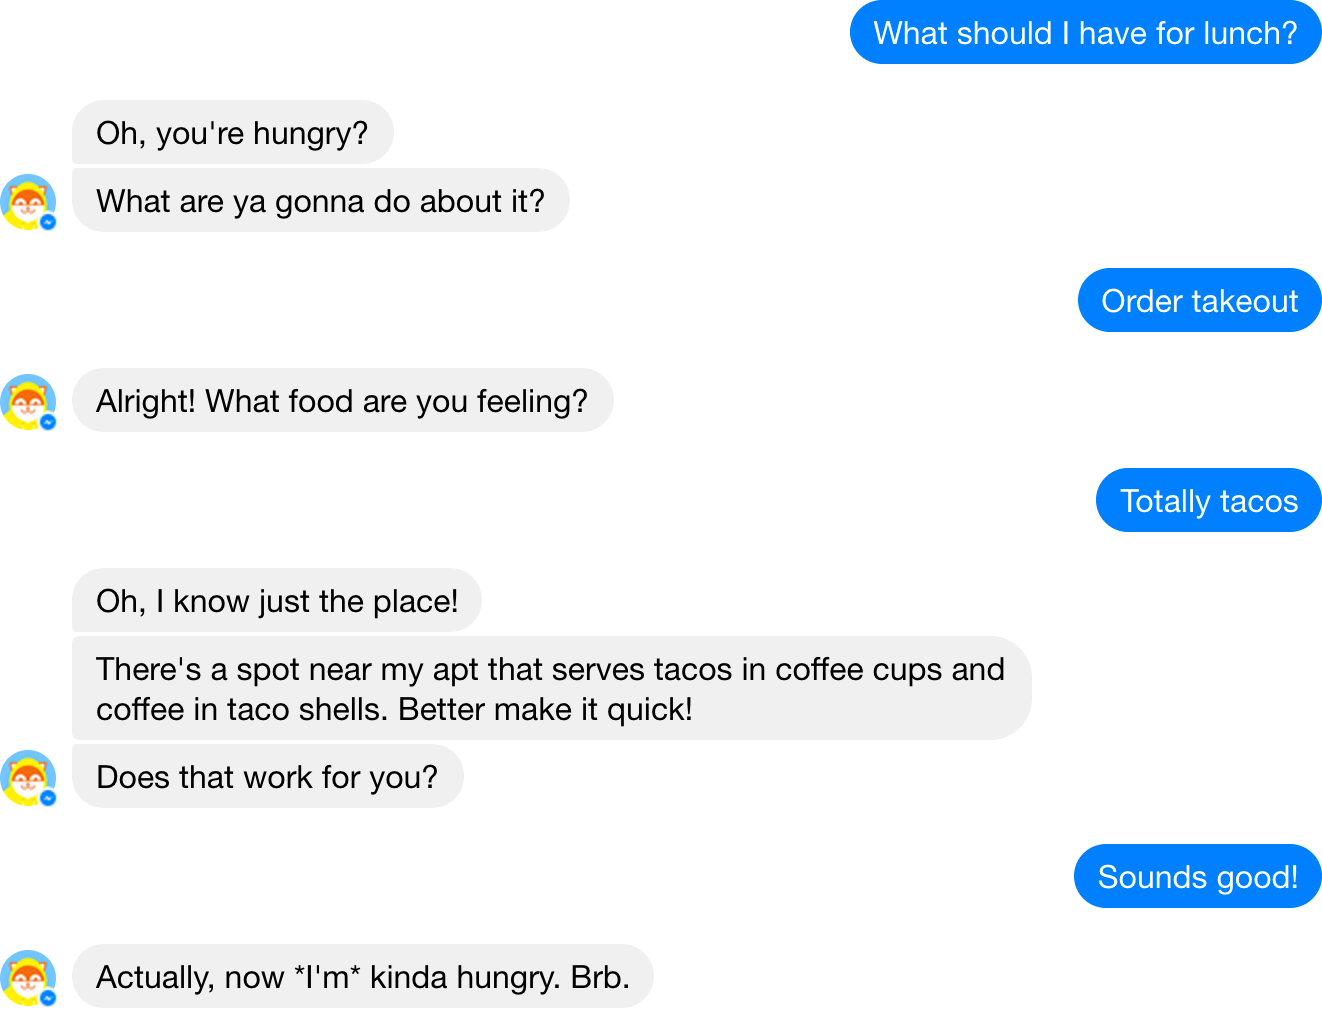 Screenshot of a conversation between a human and the Poncho chatbot